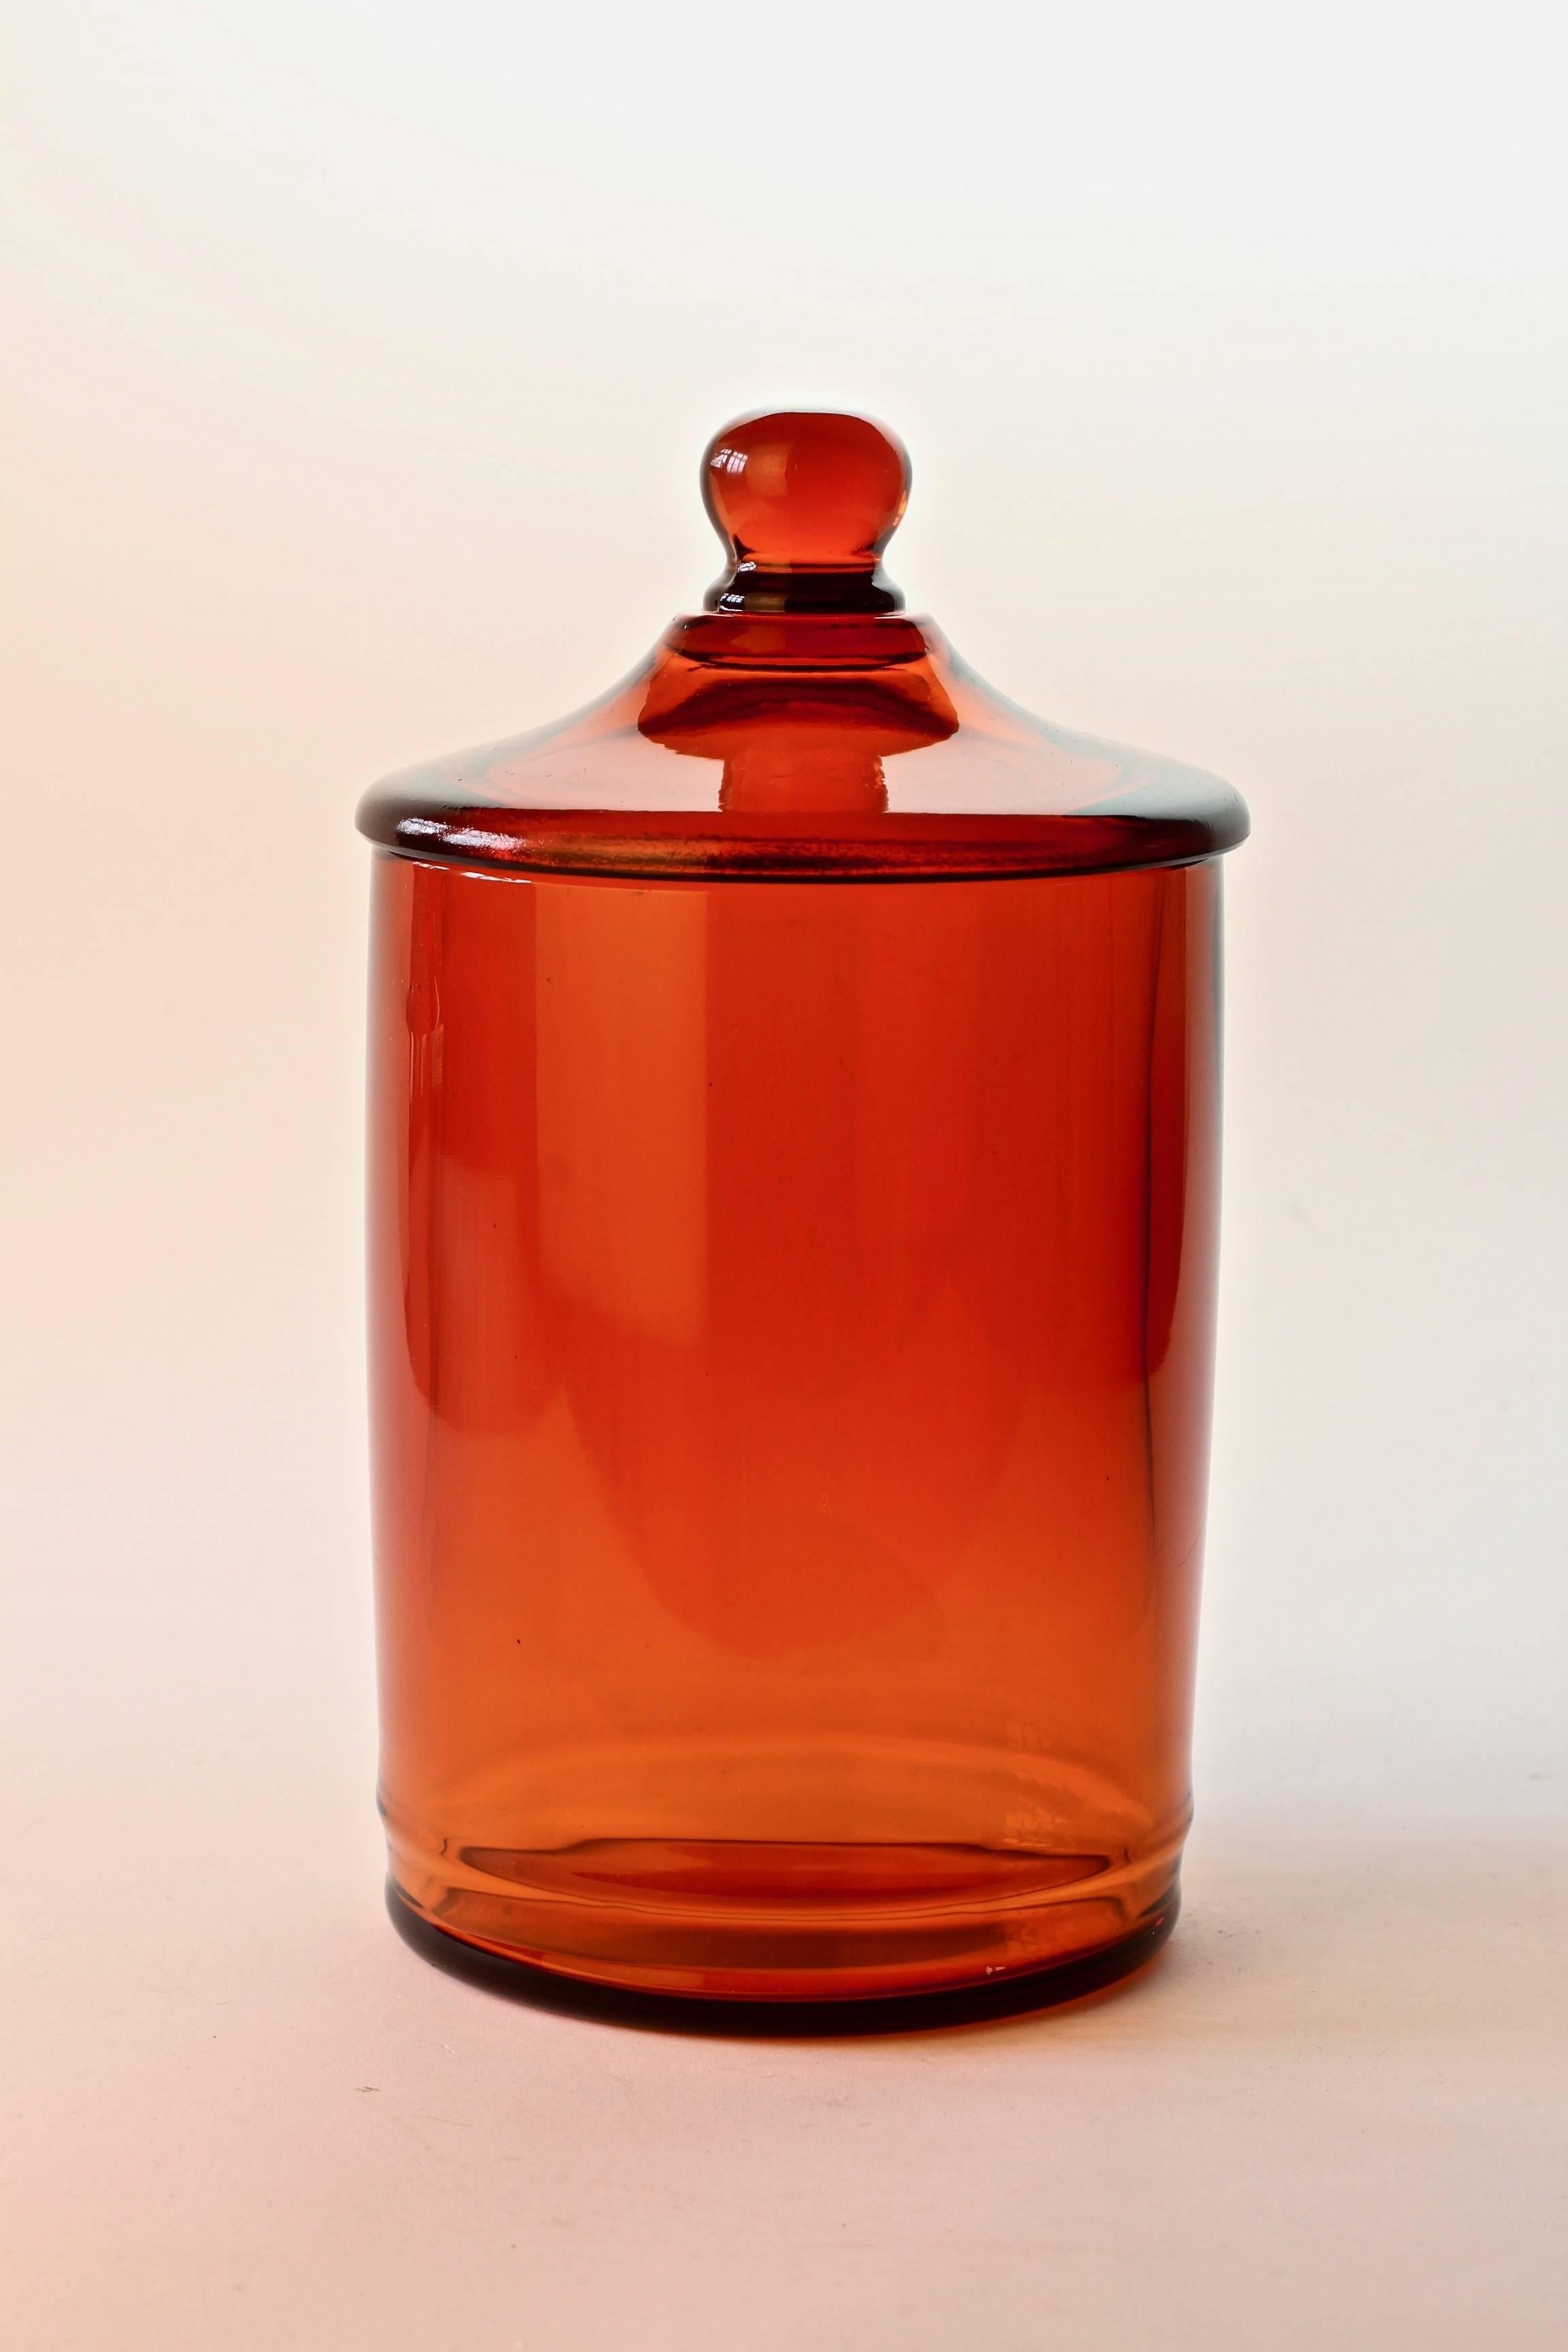 Cenedese (attributed) Murano amber colored / coloured glass Apothecary jar or urn with lid. Wonderful Italian glass and perfect for storage in the kitchen or bathroom. Similar in style to the original designs of apothecary jars from the 19th and